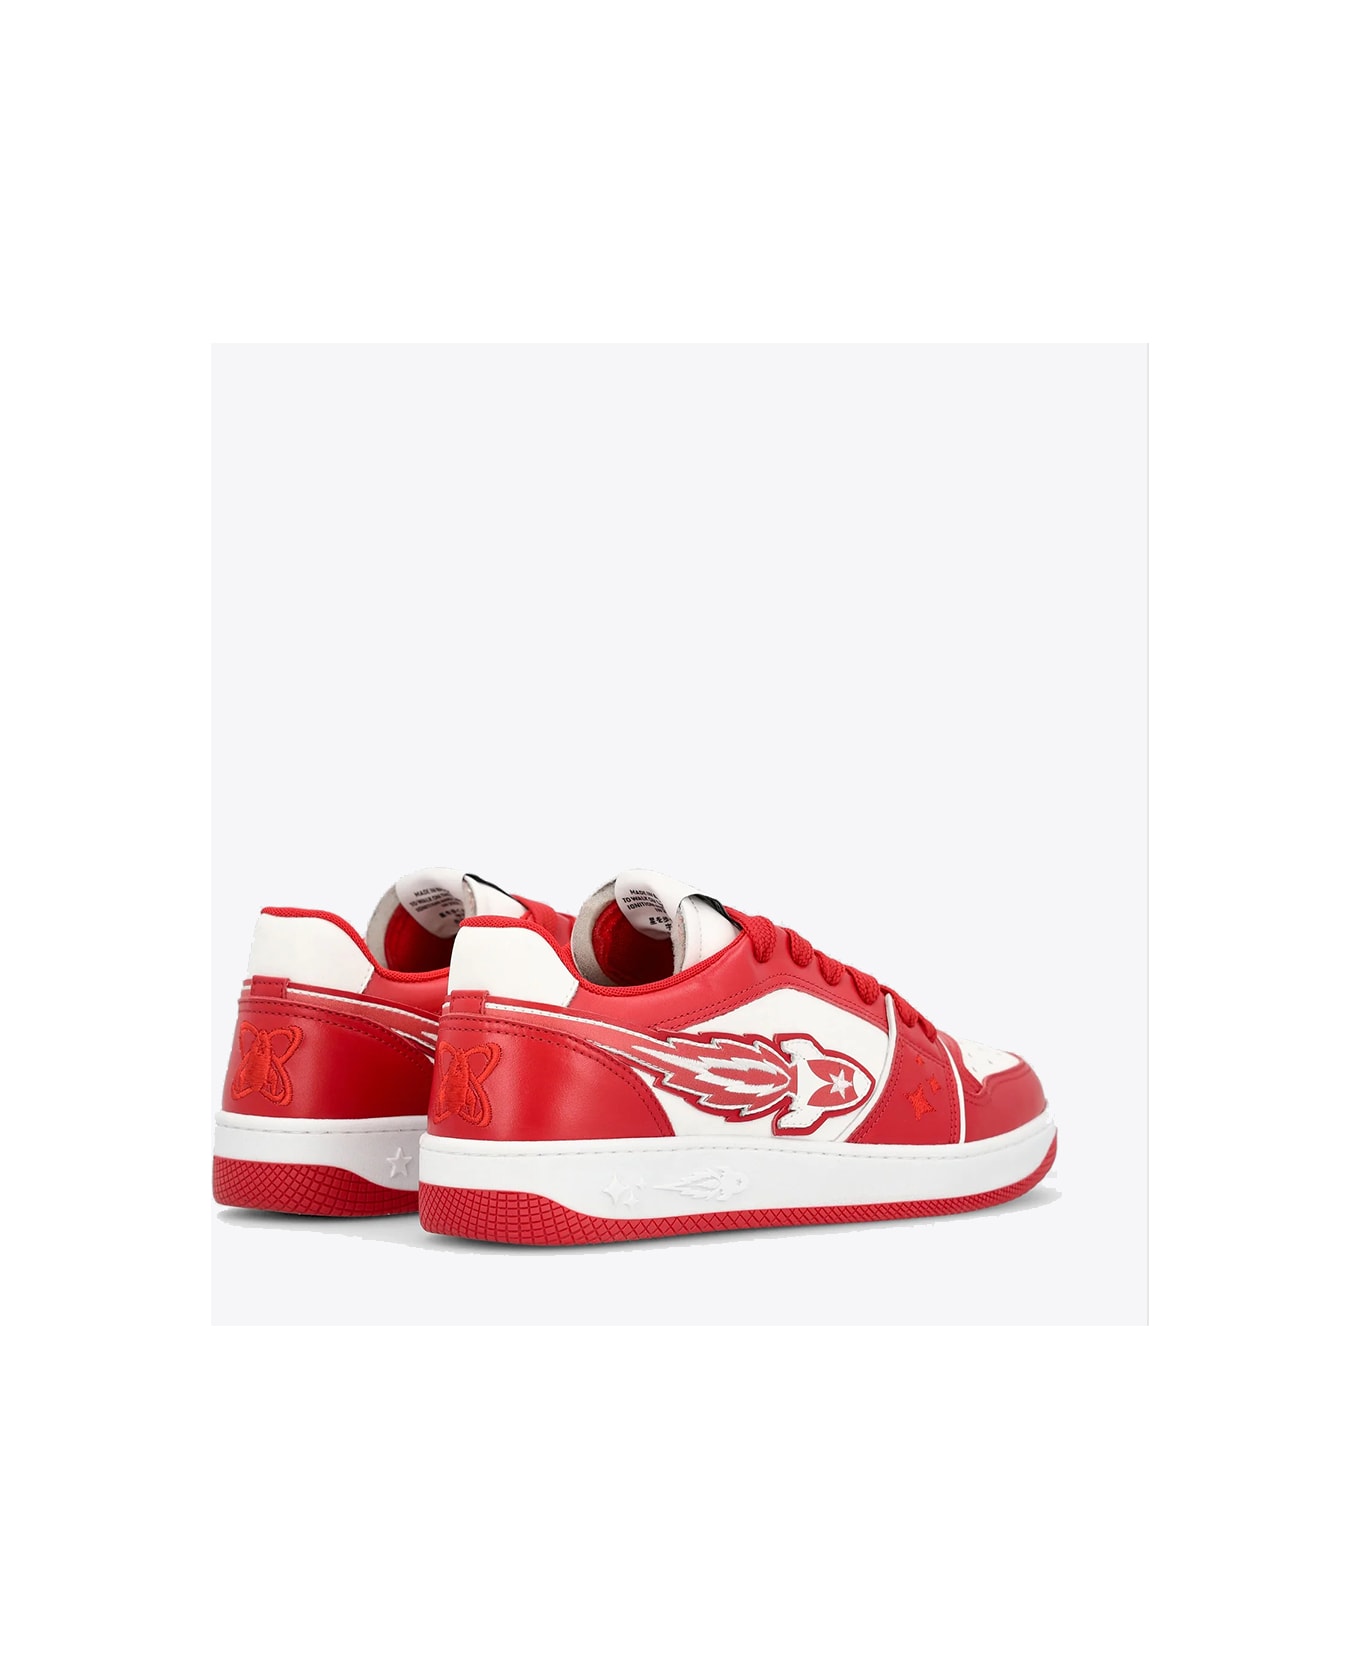 Enterprise Japan Ej Egg Rocket M - Low Sn C.o. Calf Red and white low sneaker with rocket logo. - Rosso/bianco